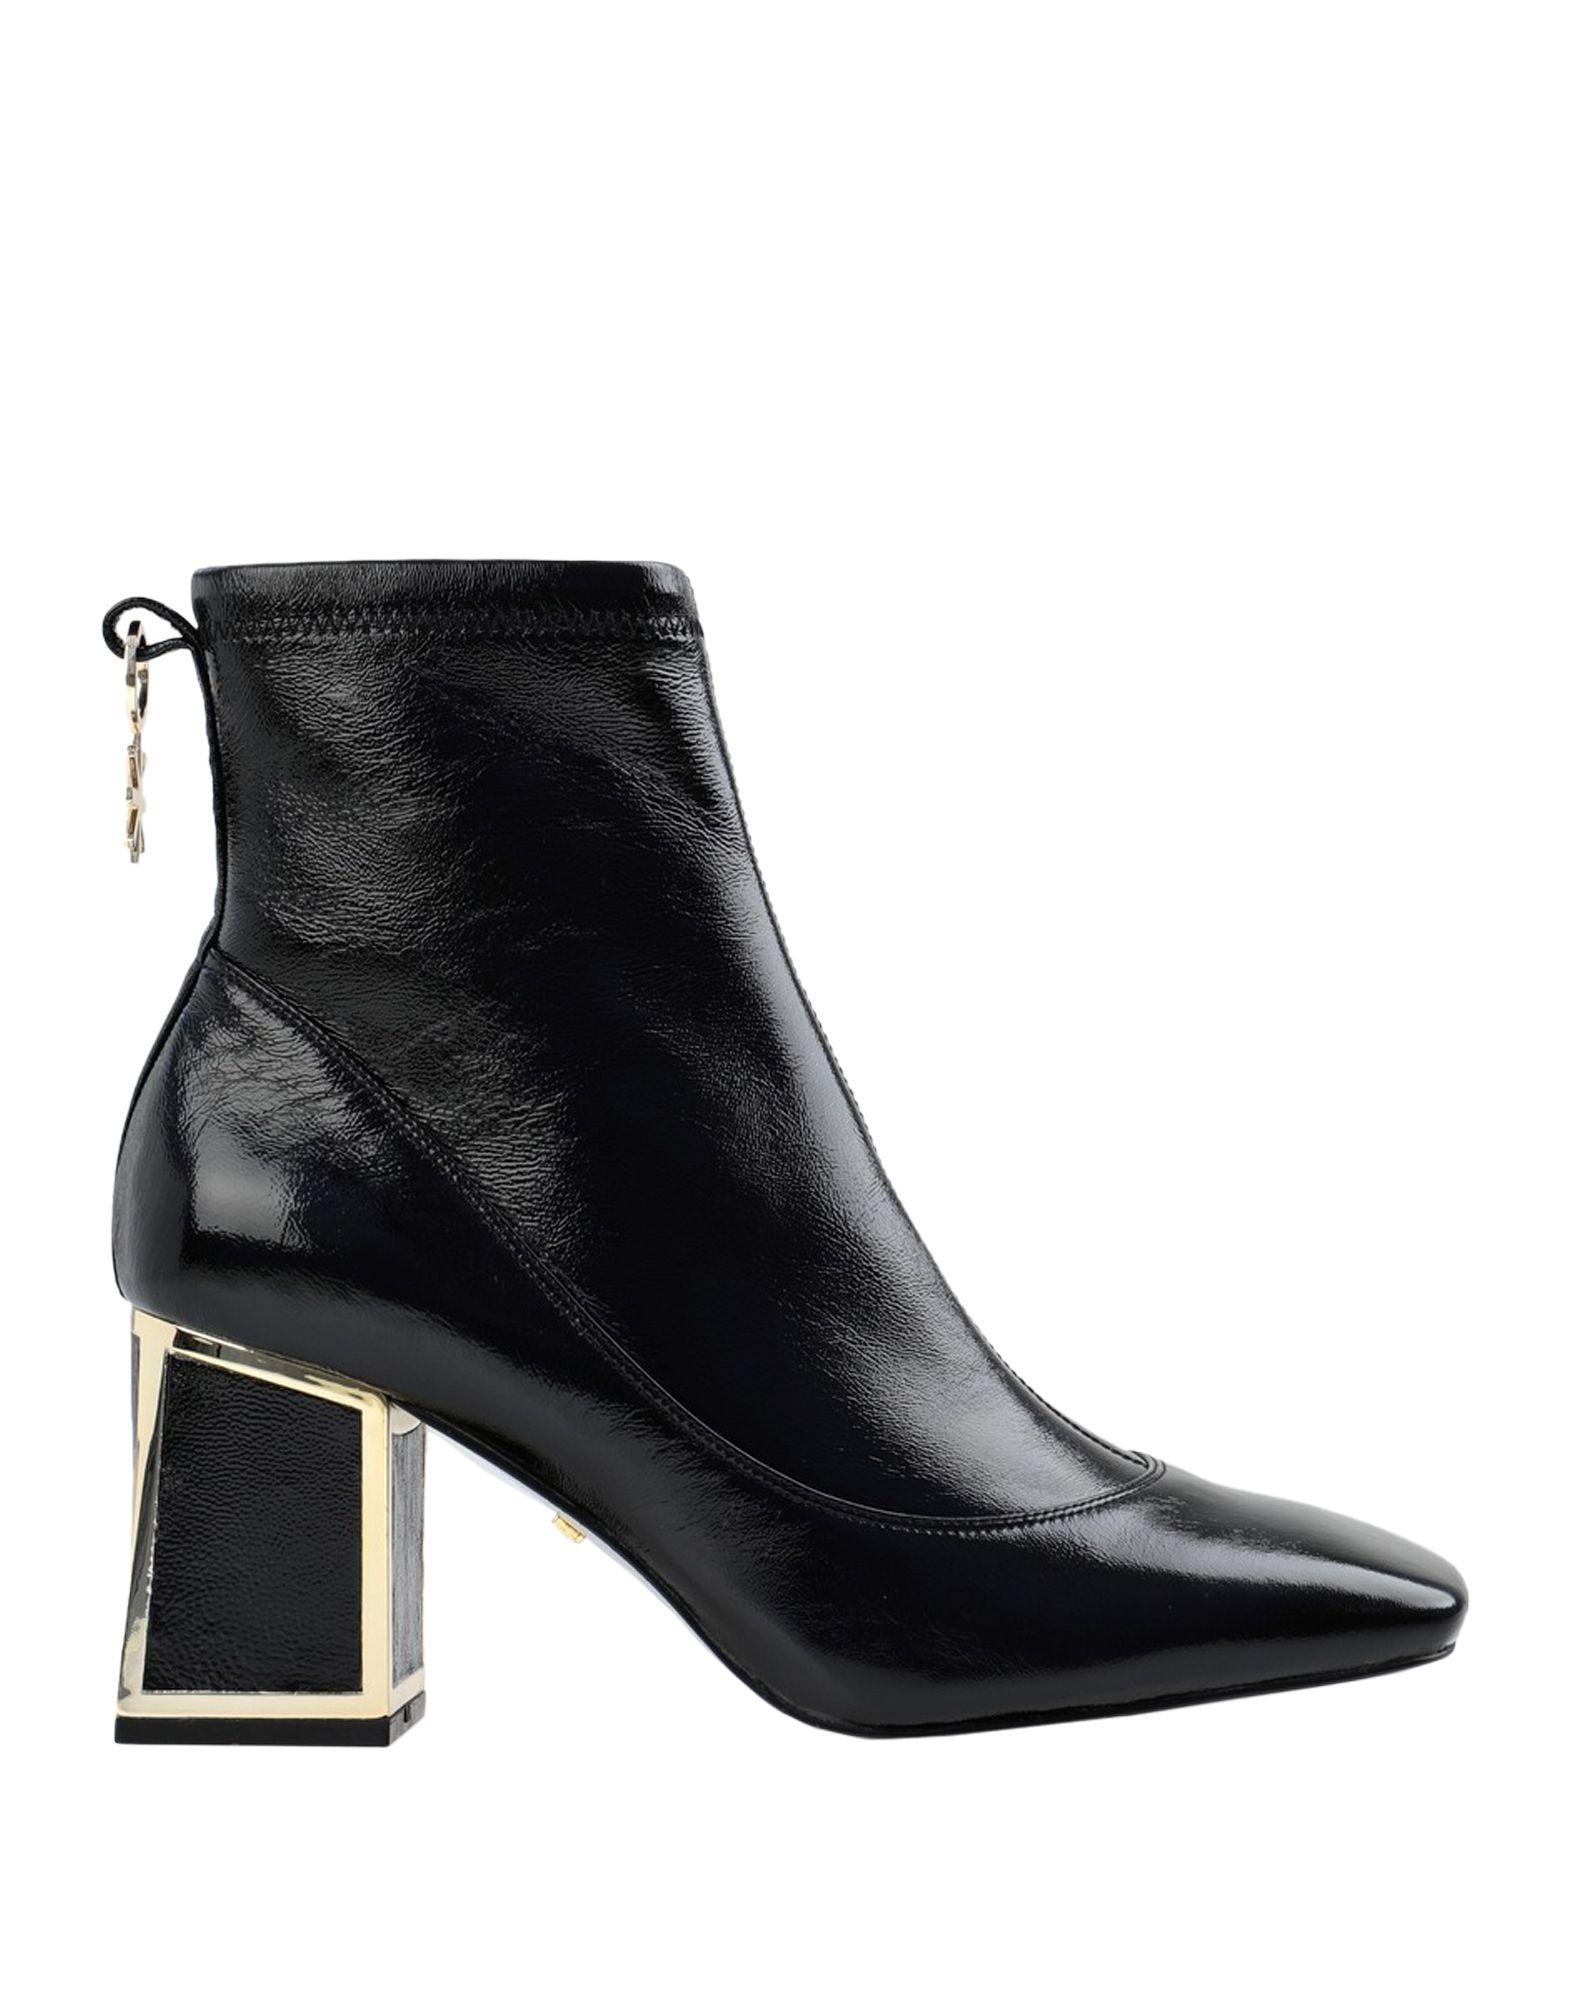 Kat Maconie Leather Ankle Boots in Black - Lyst